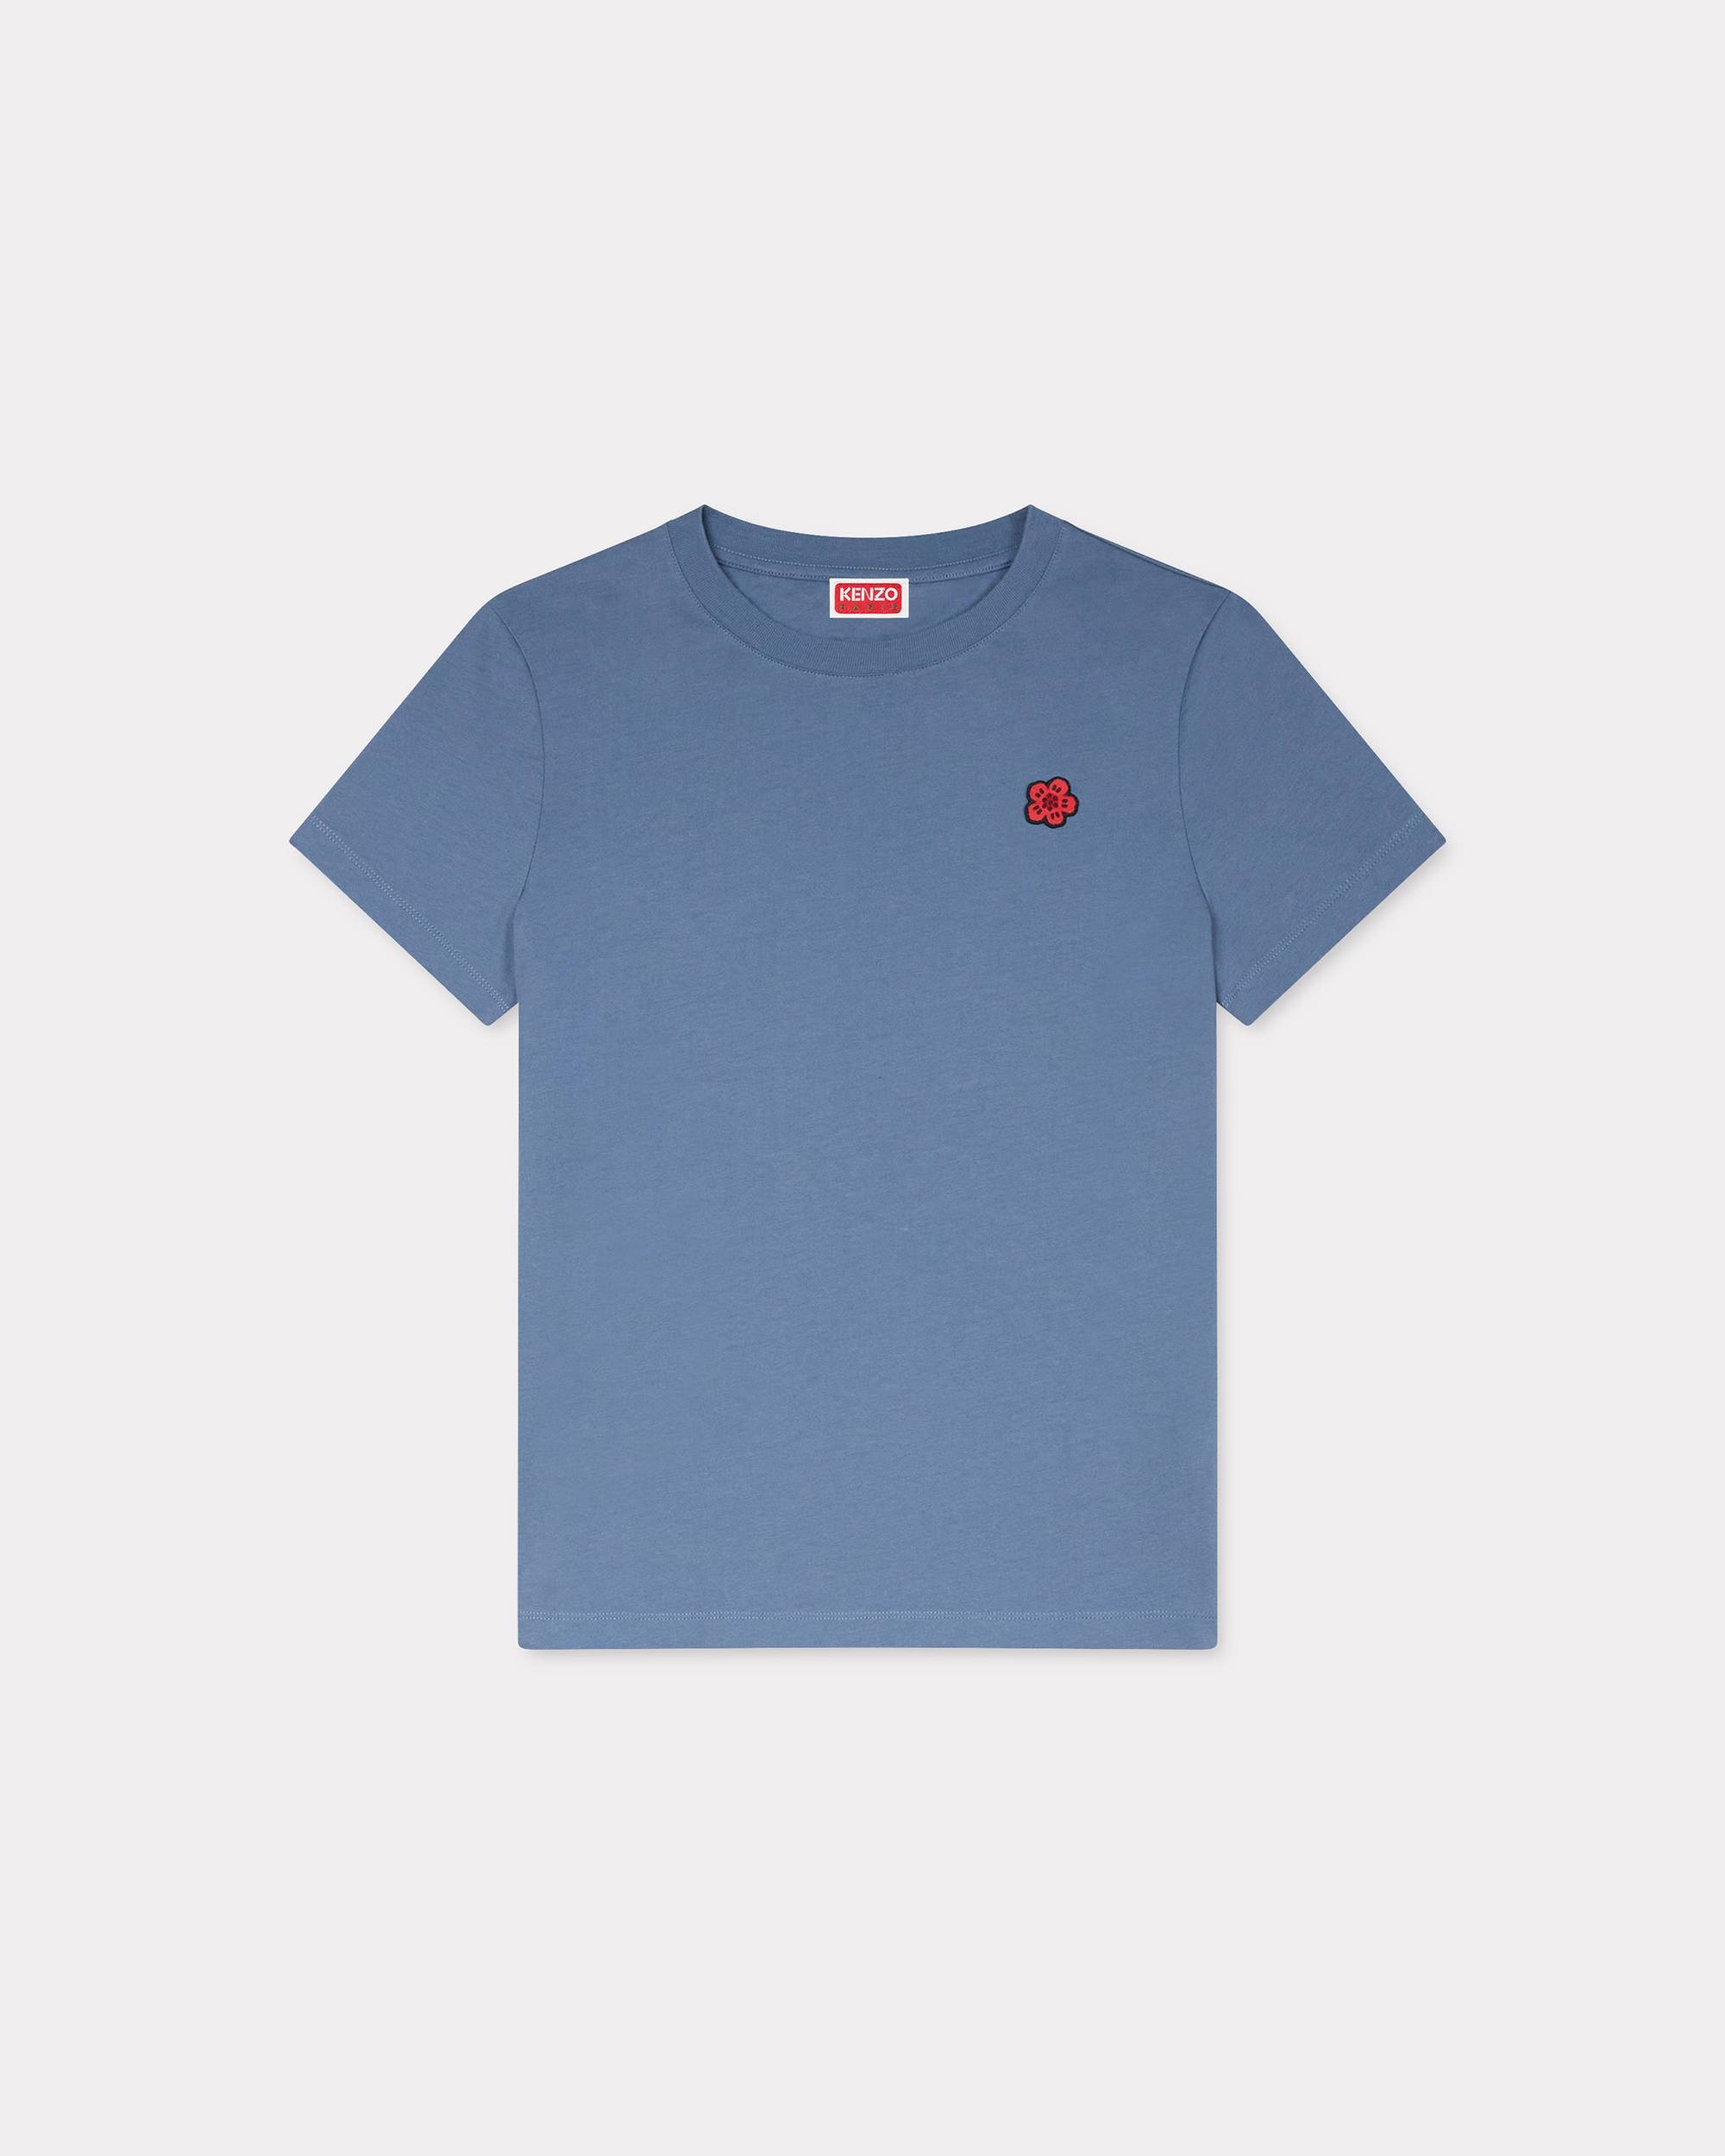 'Boke Flower' classic embroidered T-shirt - 1